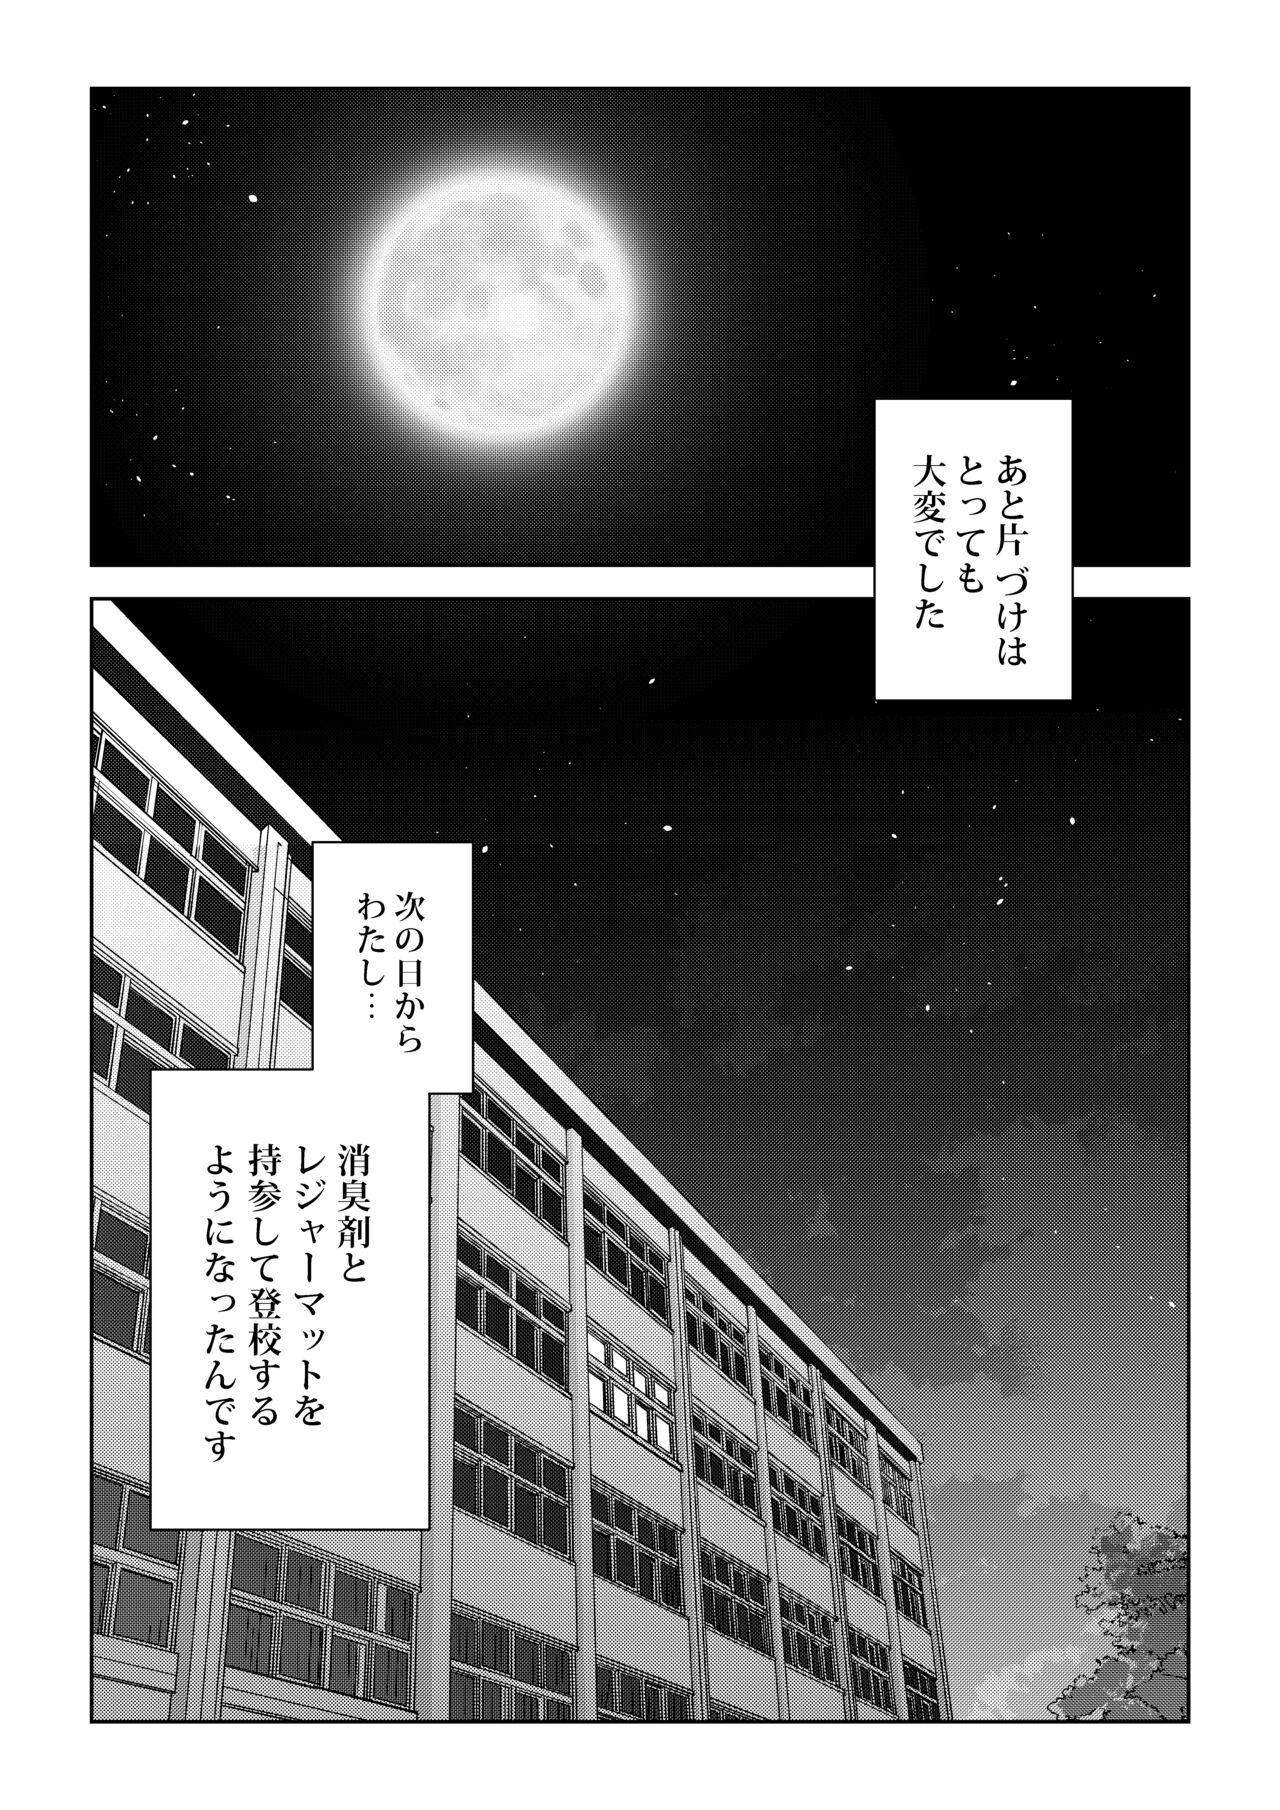 Hardcore 放課後の教室で - Original Point Of View - Page 28